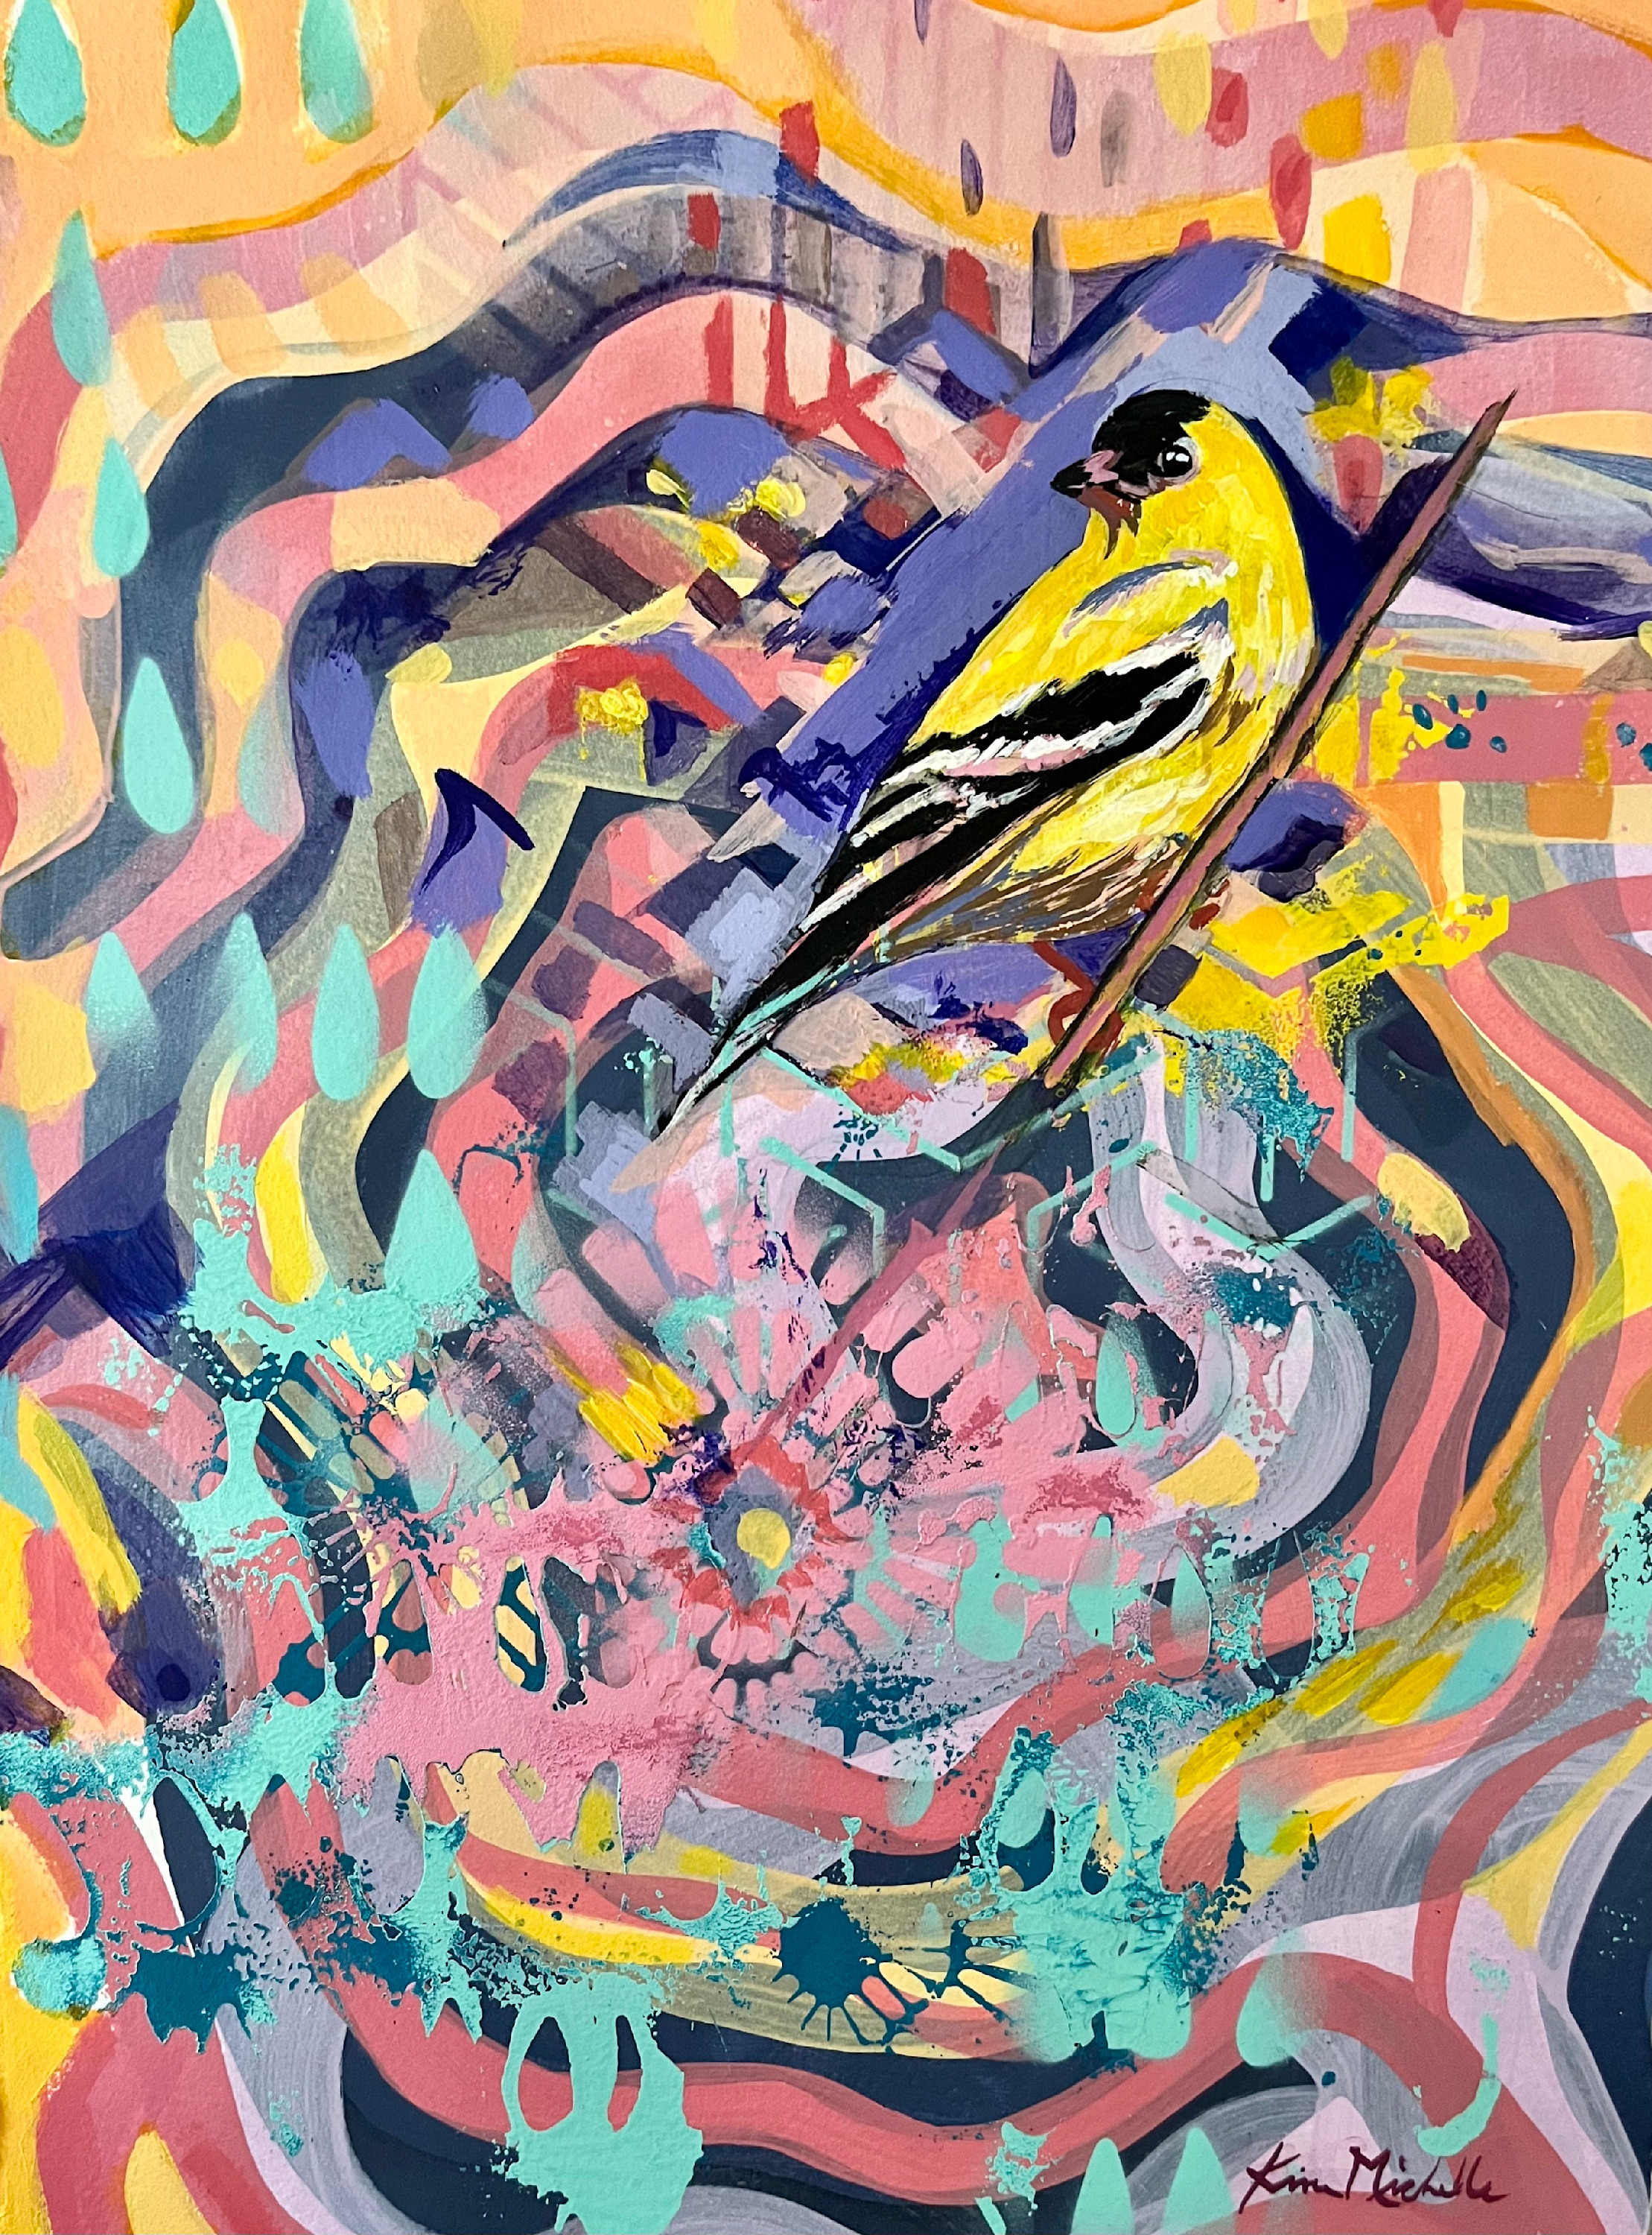 Goldfinch in the whirlwind nslh50